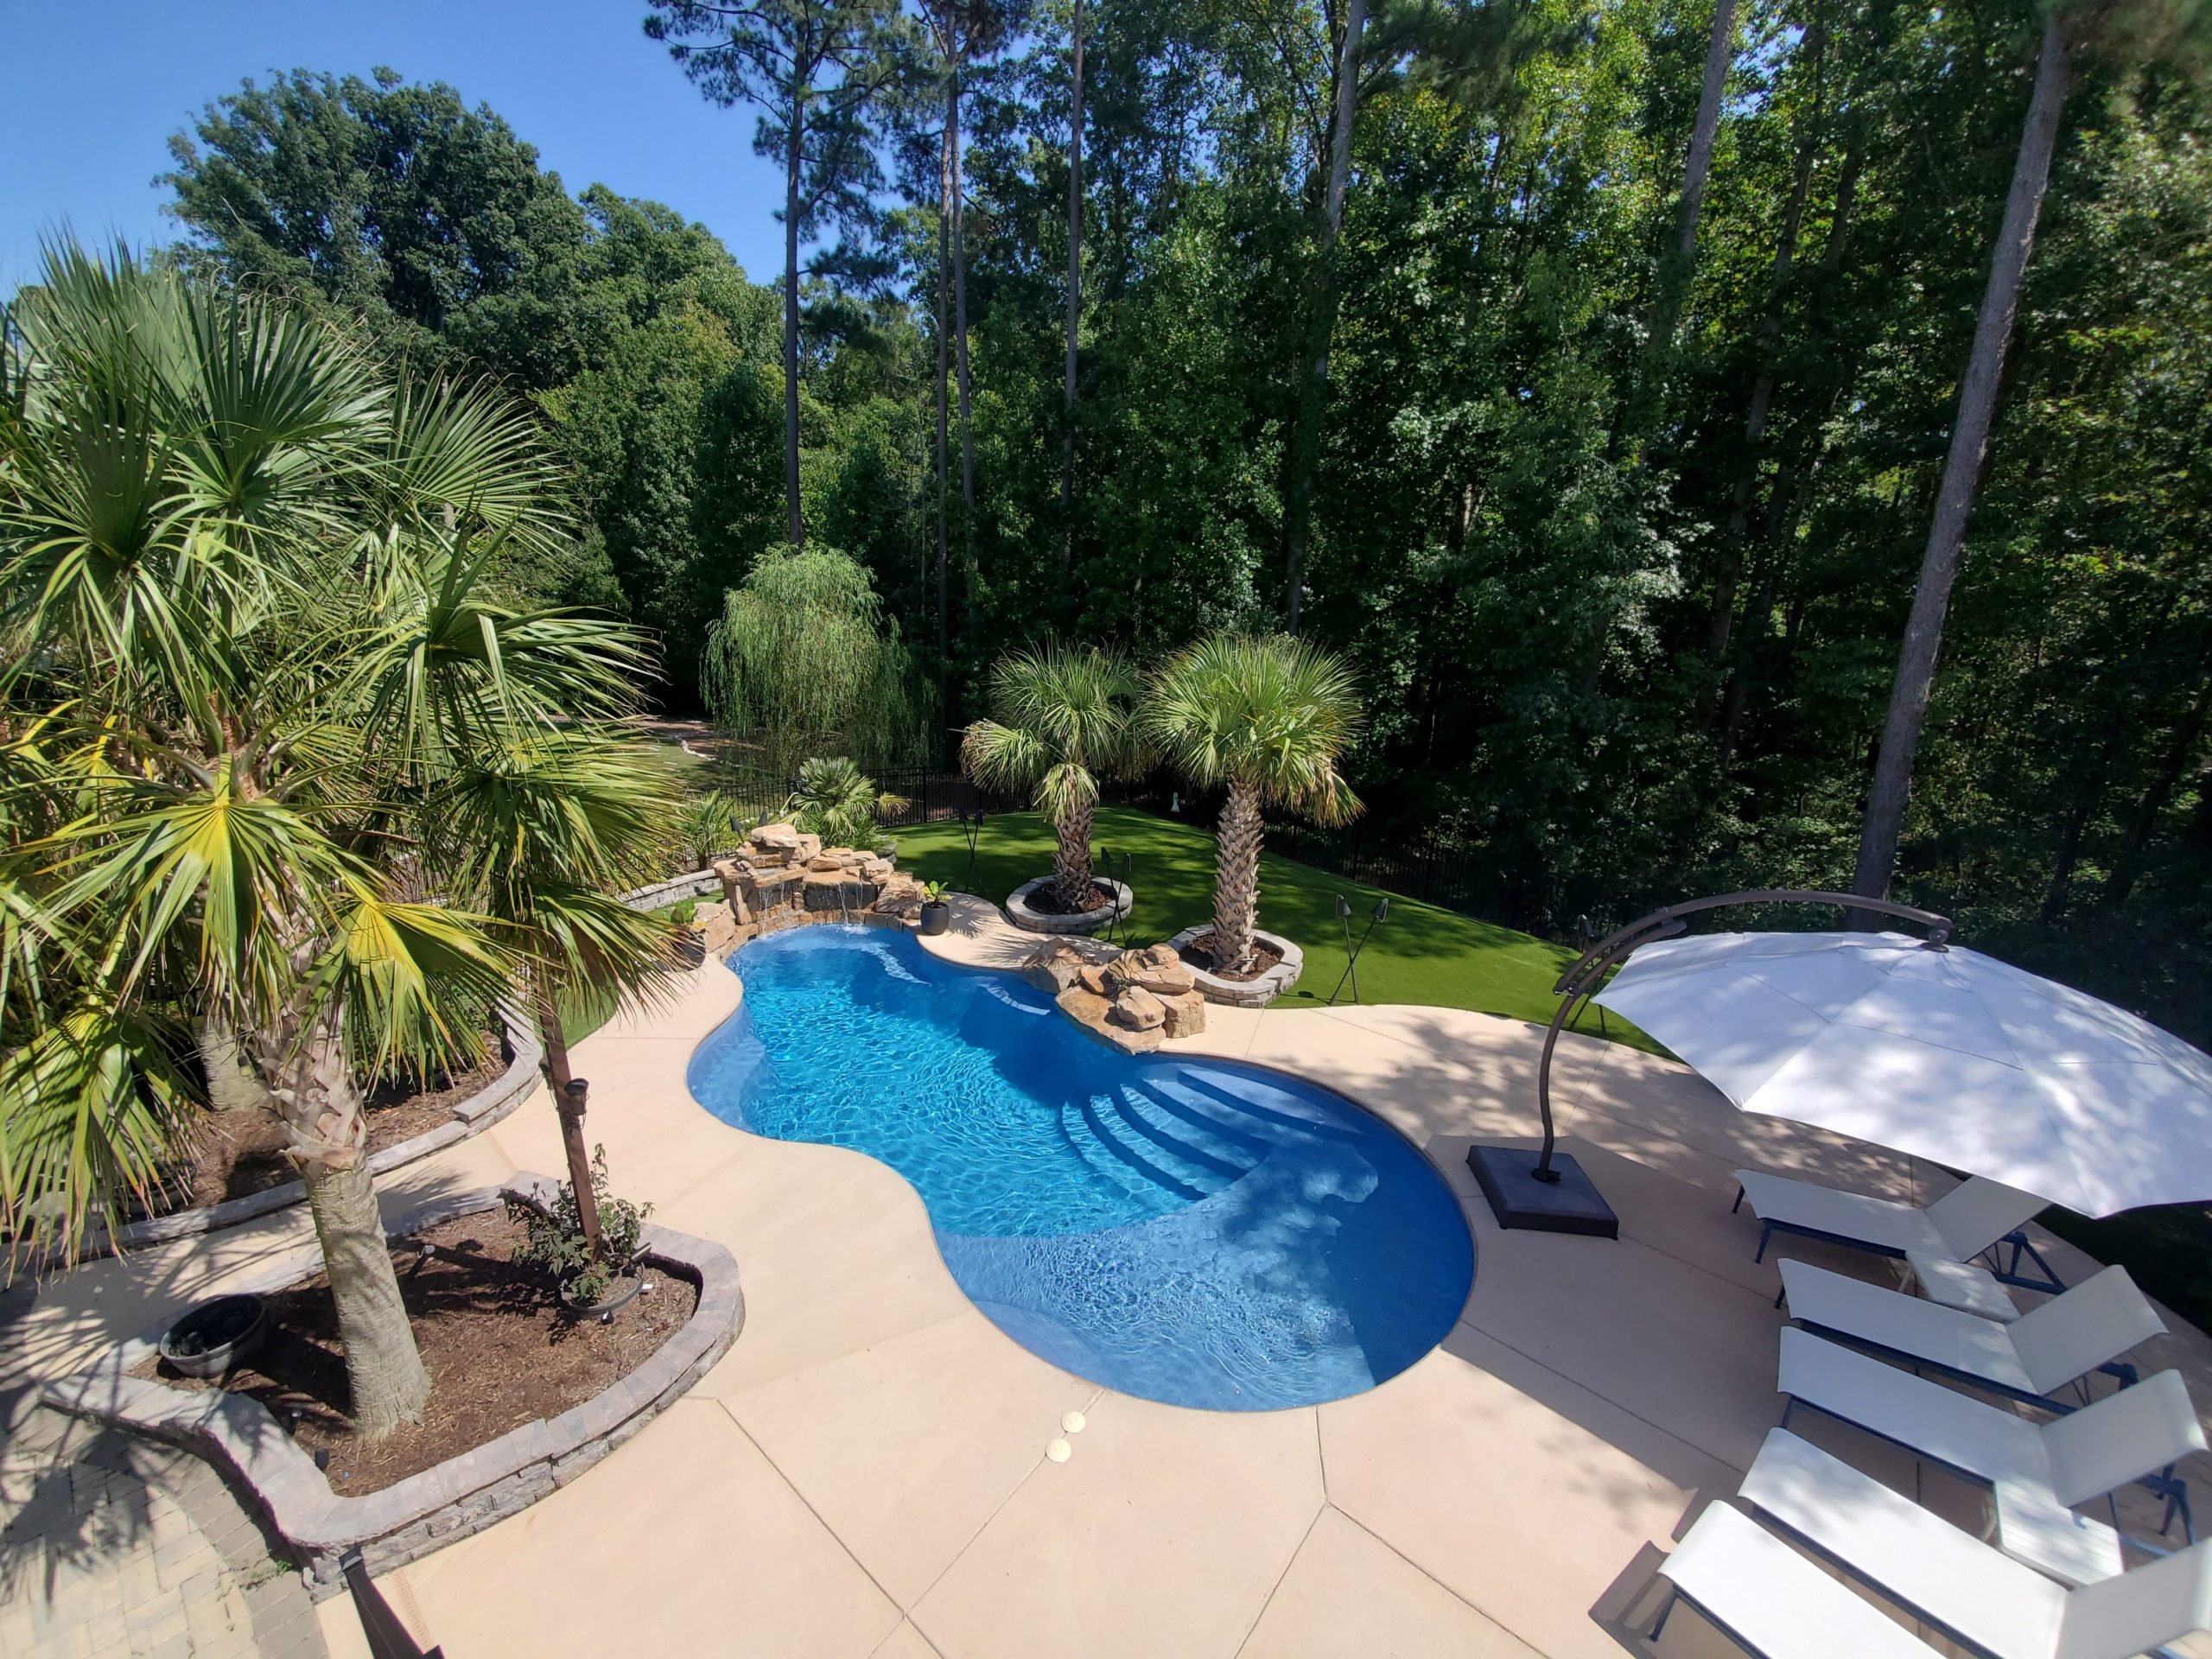 5 Things to Consider Before Installing an In-Ground Pool